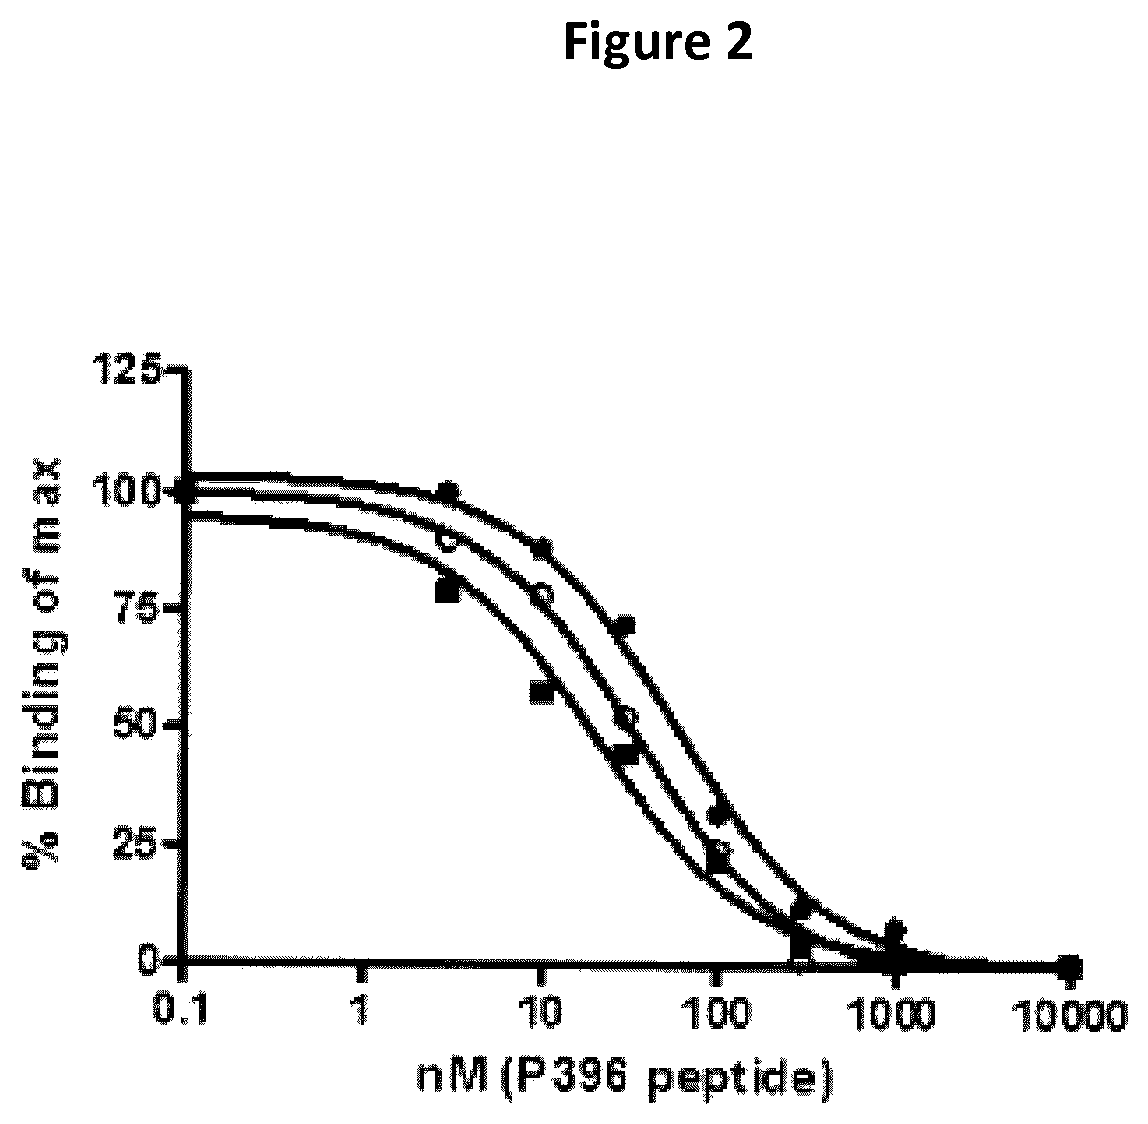 Antibodies specific for hyperphosphorlated tau for the treatment of ocular diseases